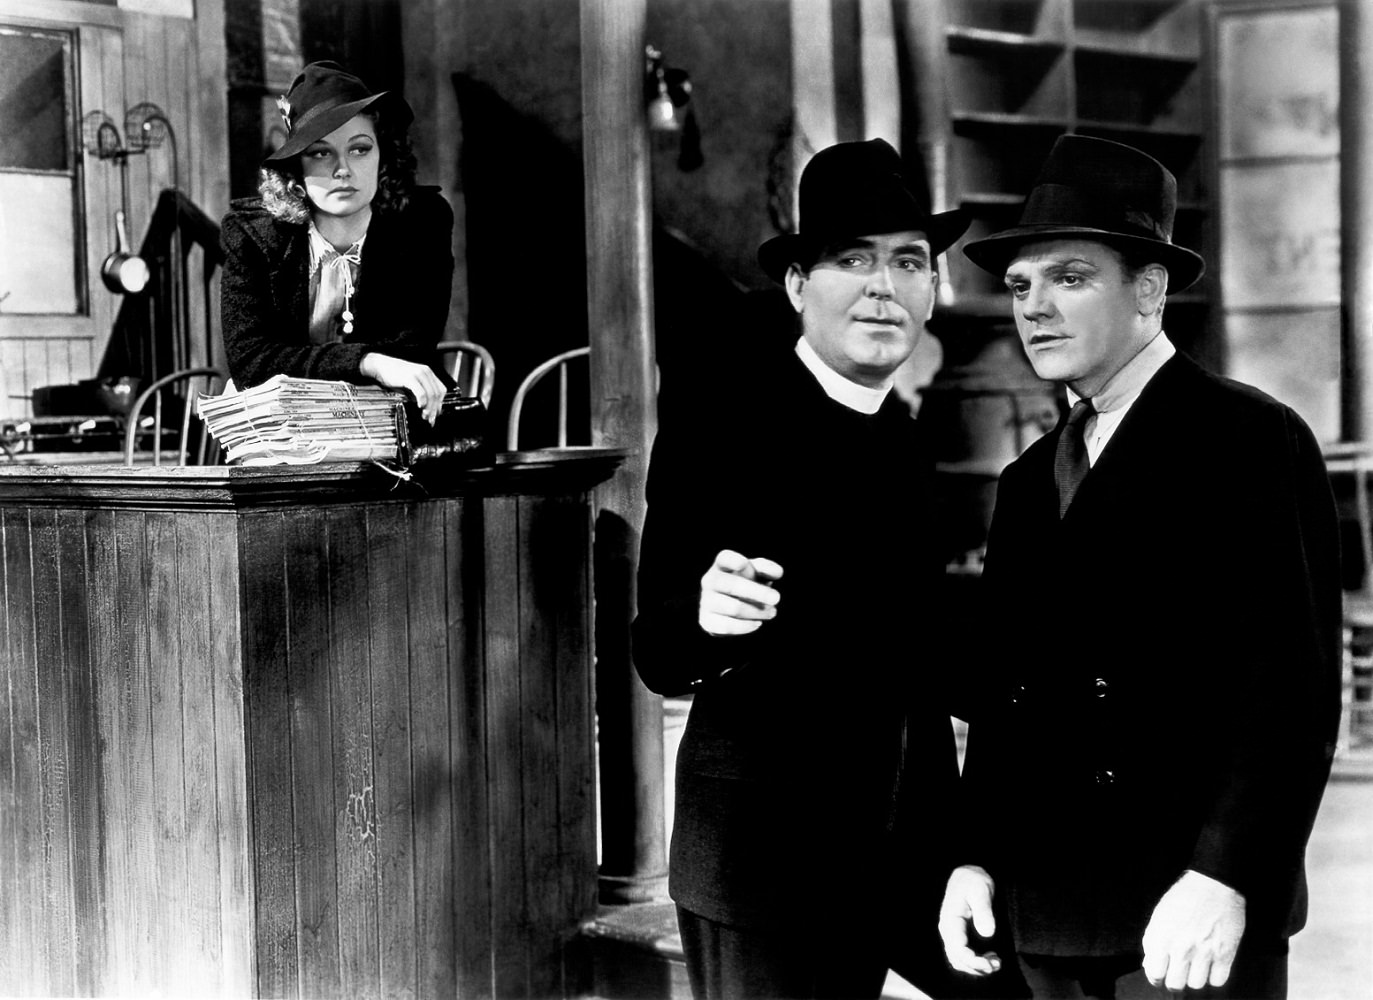 Ann Sheridan, Pat O'Brien and James Cagney in Angels with dirty faces, 1938